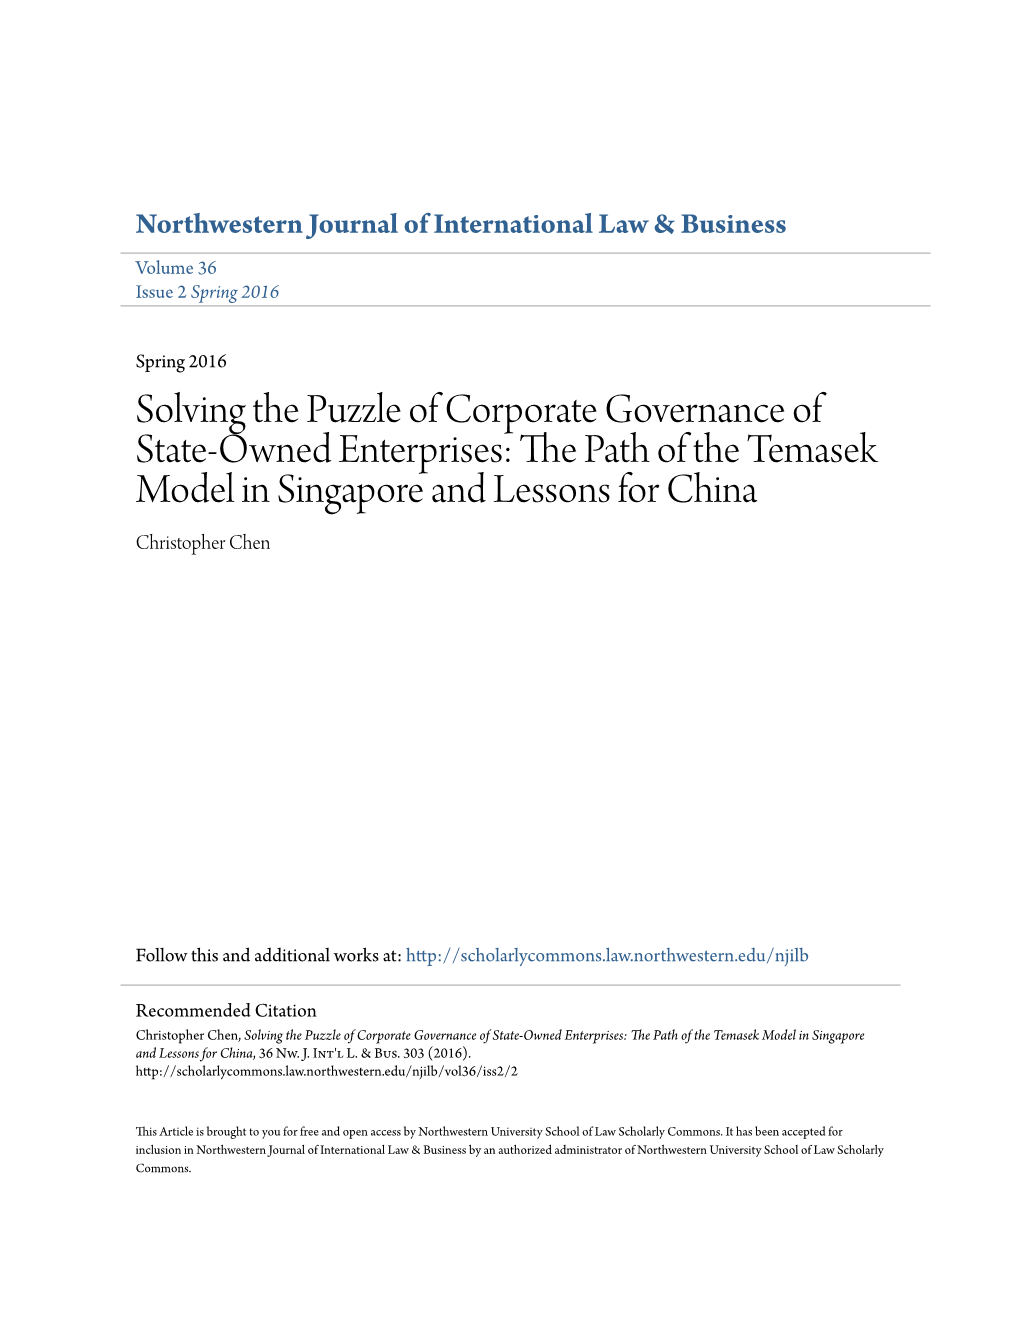 Solving the Puzzle of Corporate Governance of State-Owned Enterprises: the Ap Th of the Temasek Model in Singapore and Lessons for China Christopher Chen